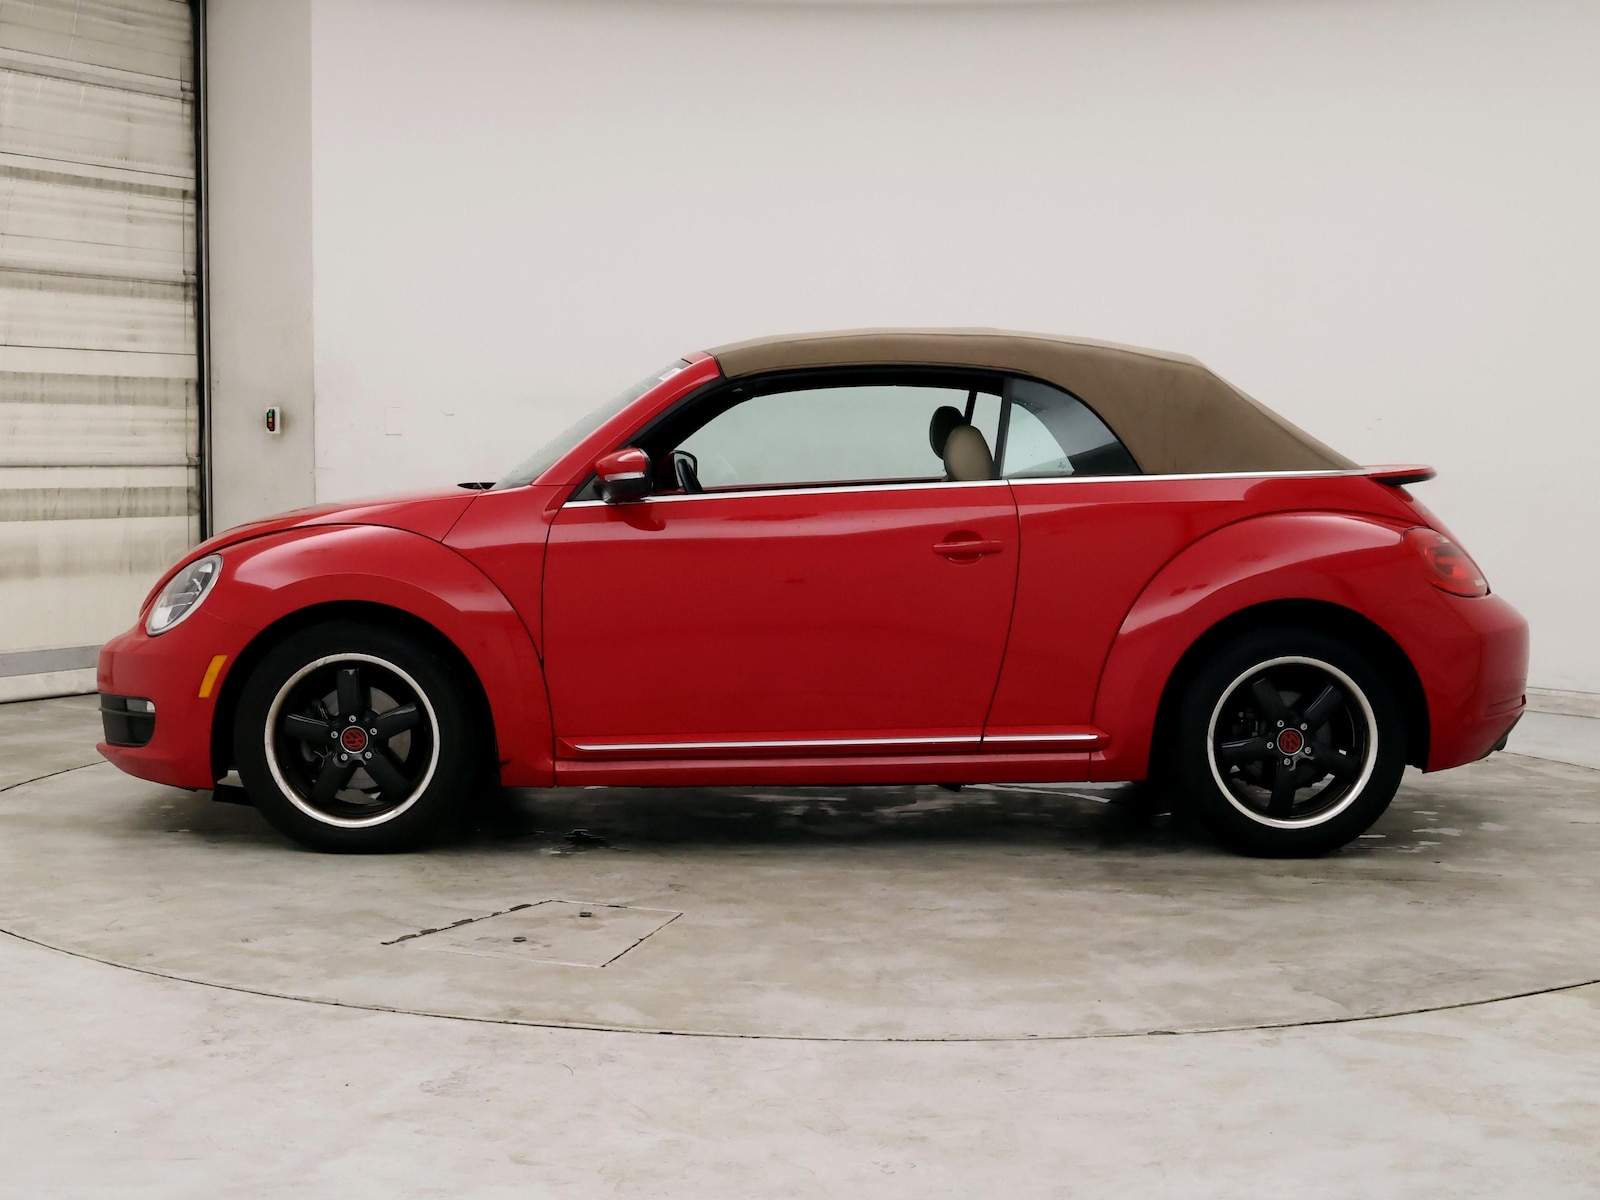 Used 2013 Volkswagen Beetle 2.5 with VIN 3VW5P7AT8DM800502 for sale in Spokane Valley, WA